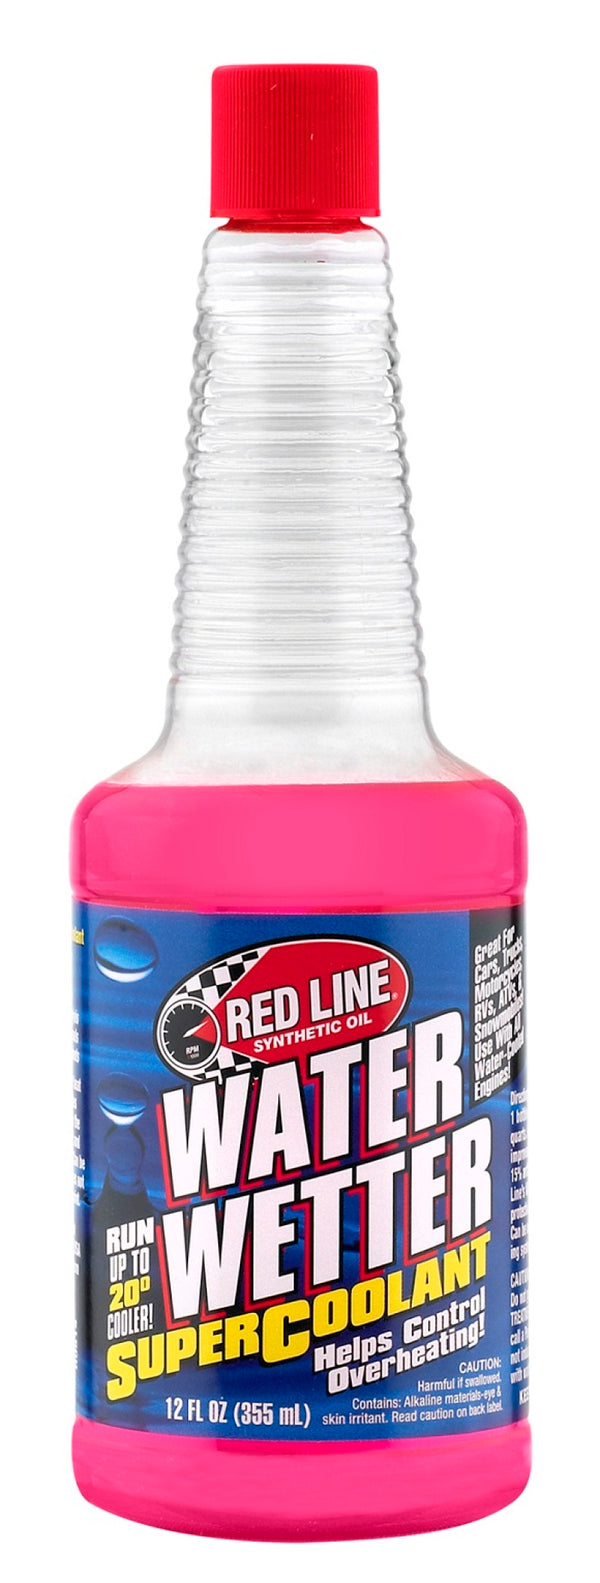 Red Line Water Wetter 12 oz. - Case of 12